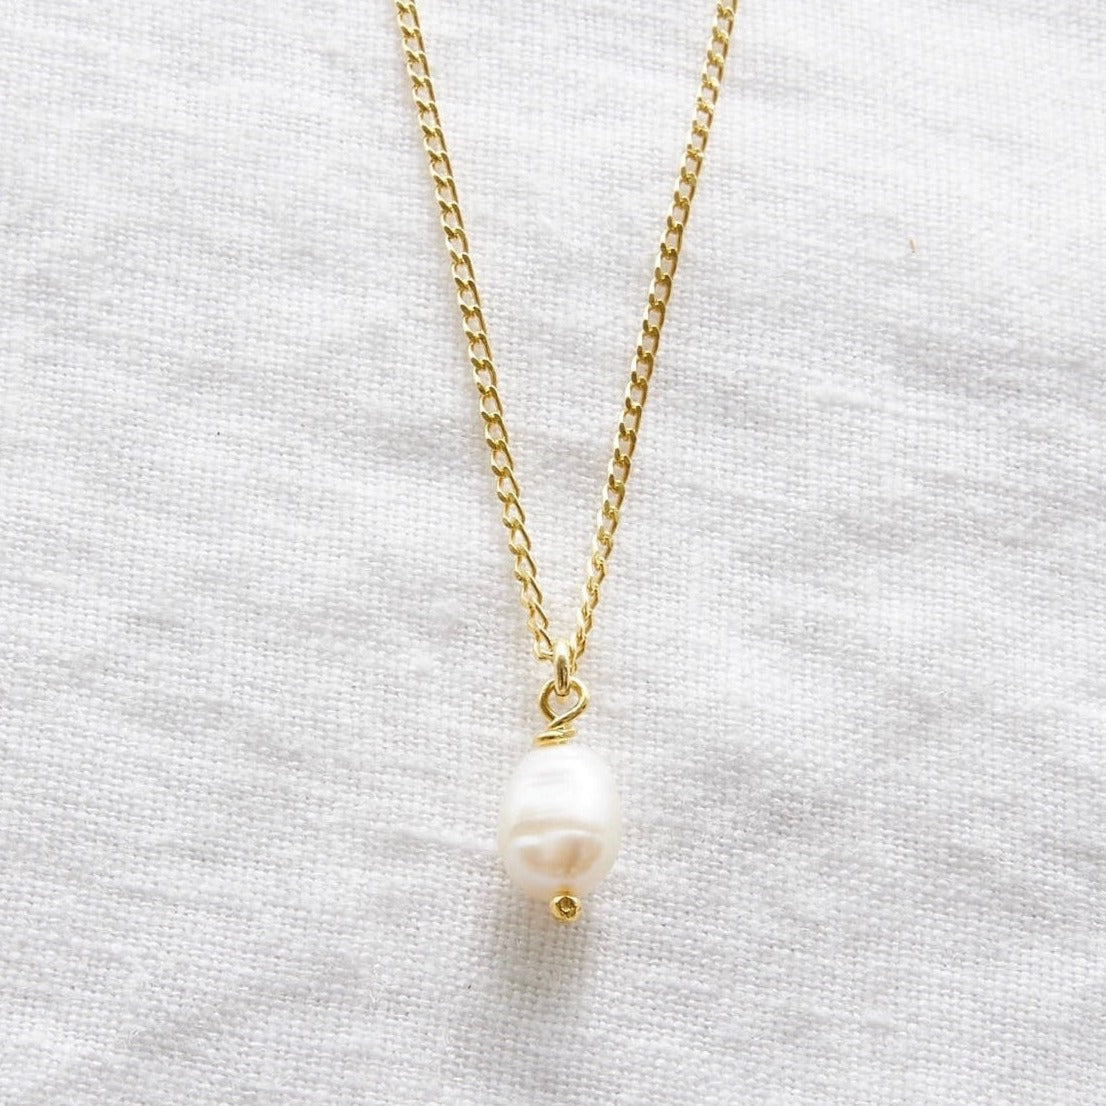 Freshwater Pearl Necklace 24k gold plated sterling silver